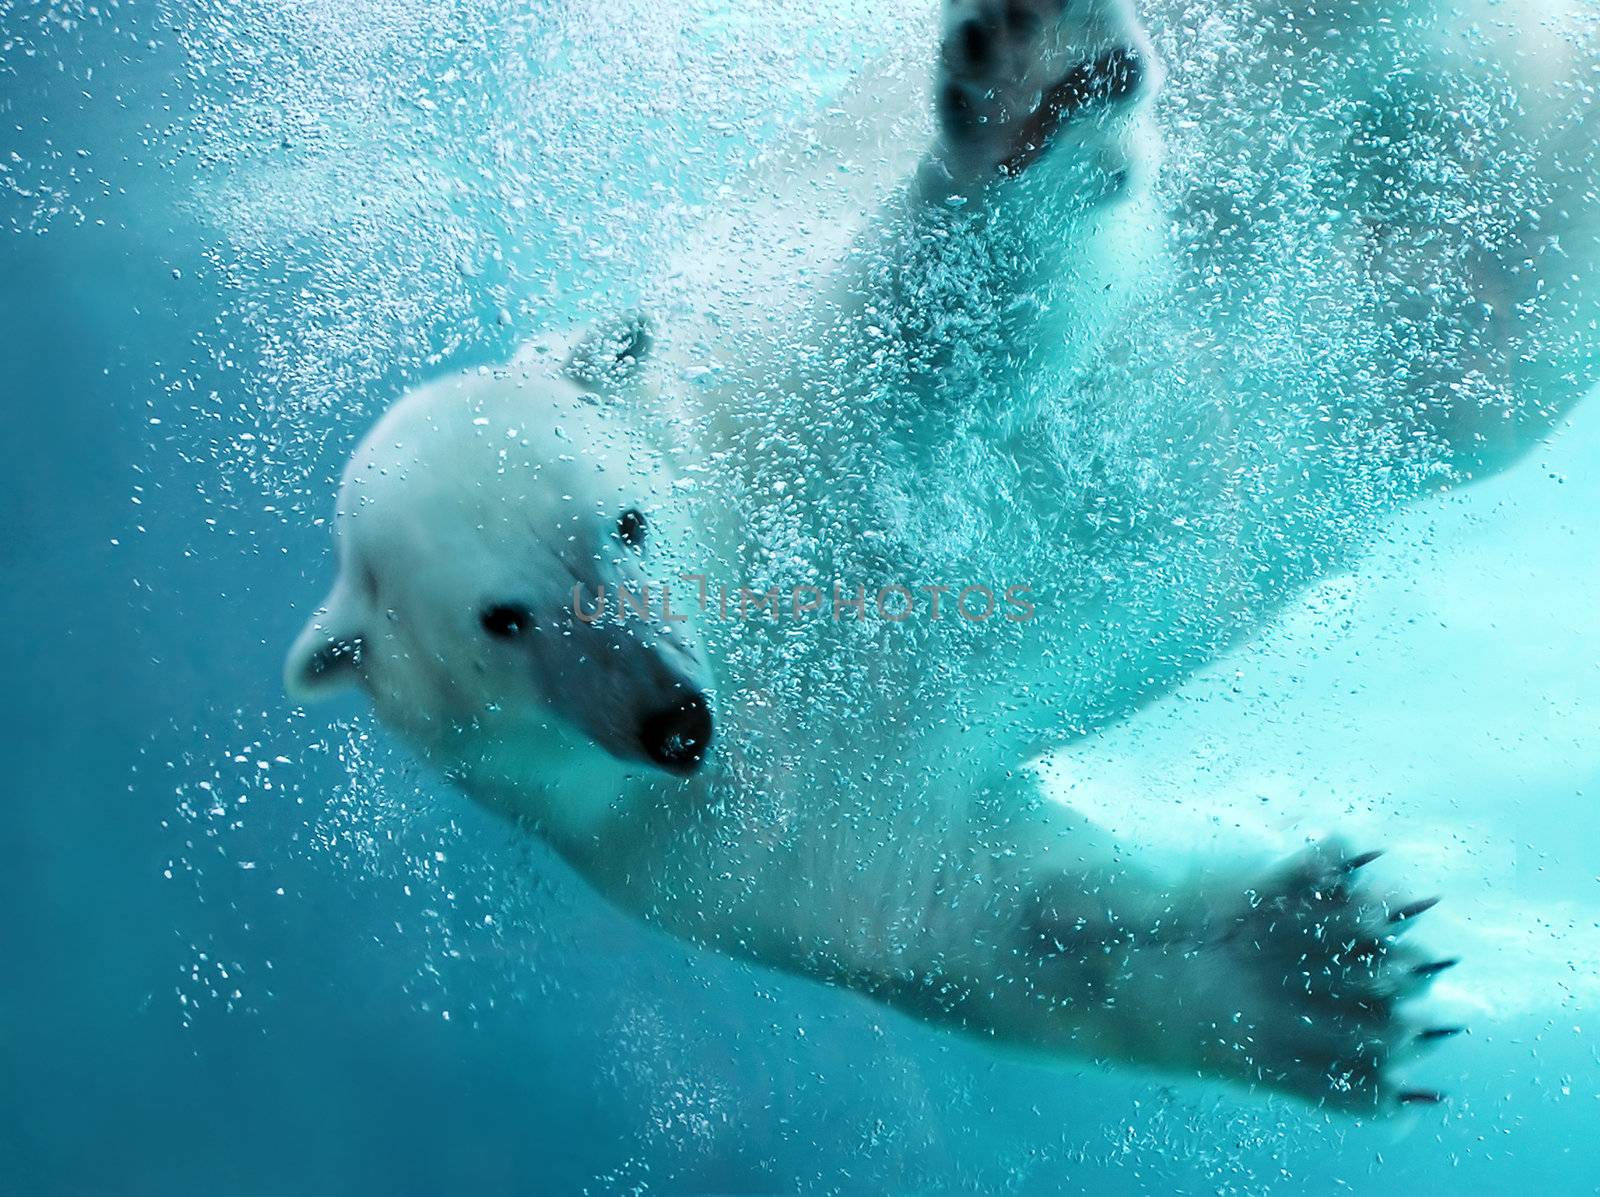 Polar bear attacking underwater with full paw blow details showing the extended claws, webbed fingers and lots of bubbles - bear looking at camera.  